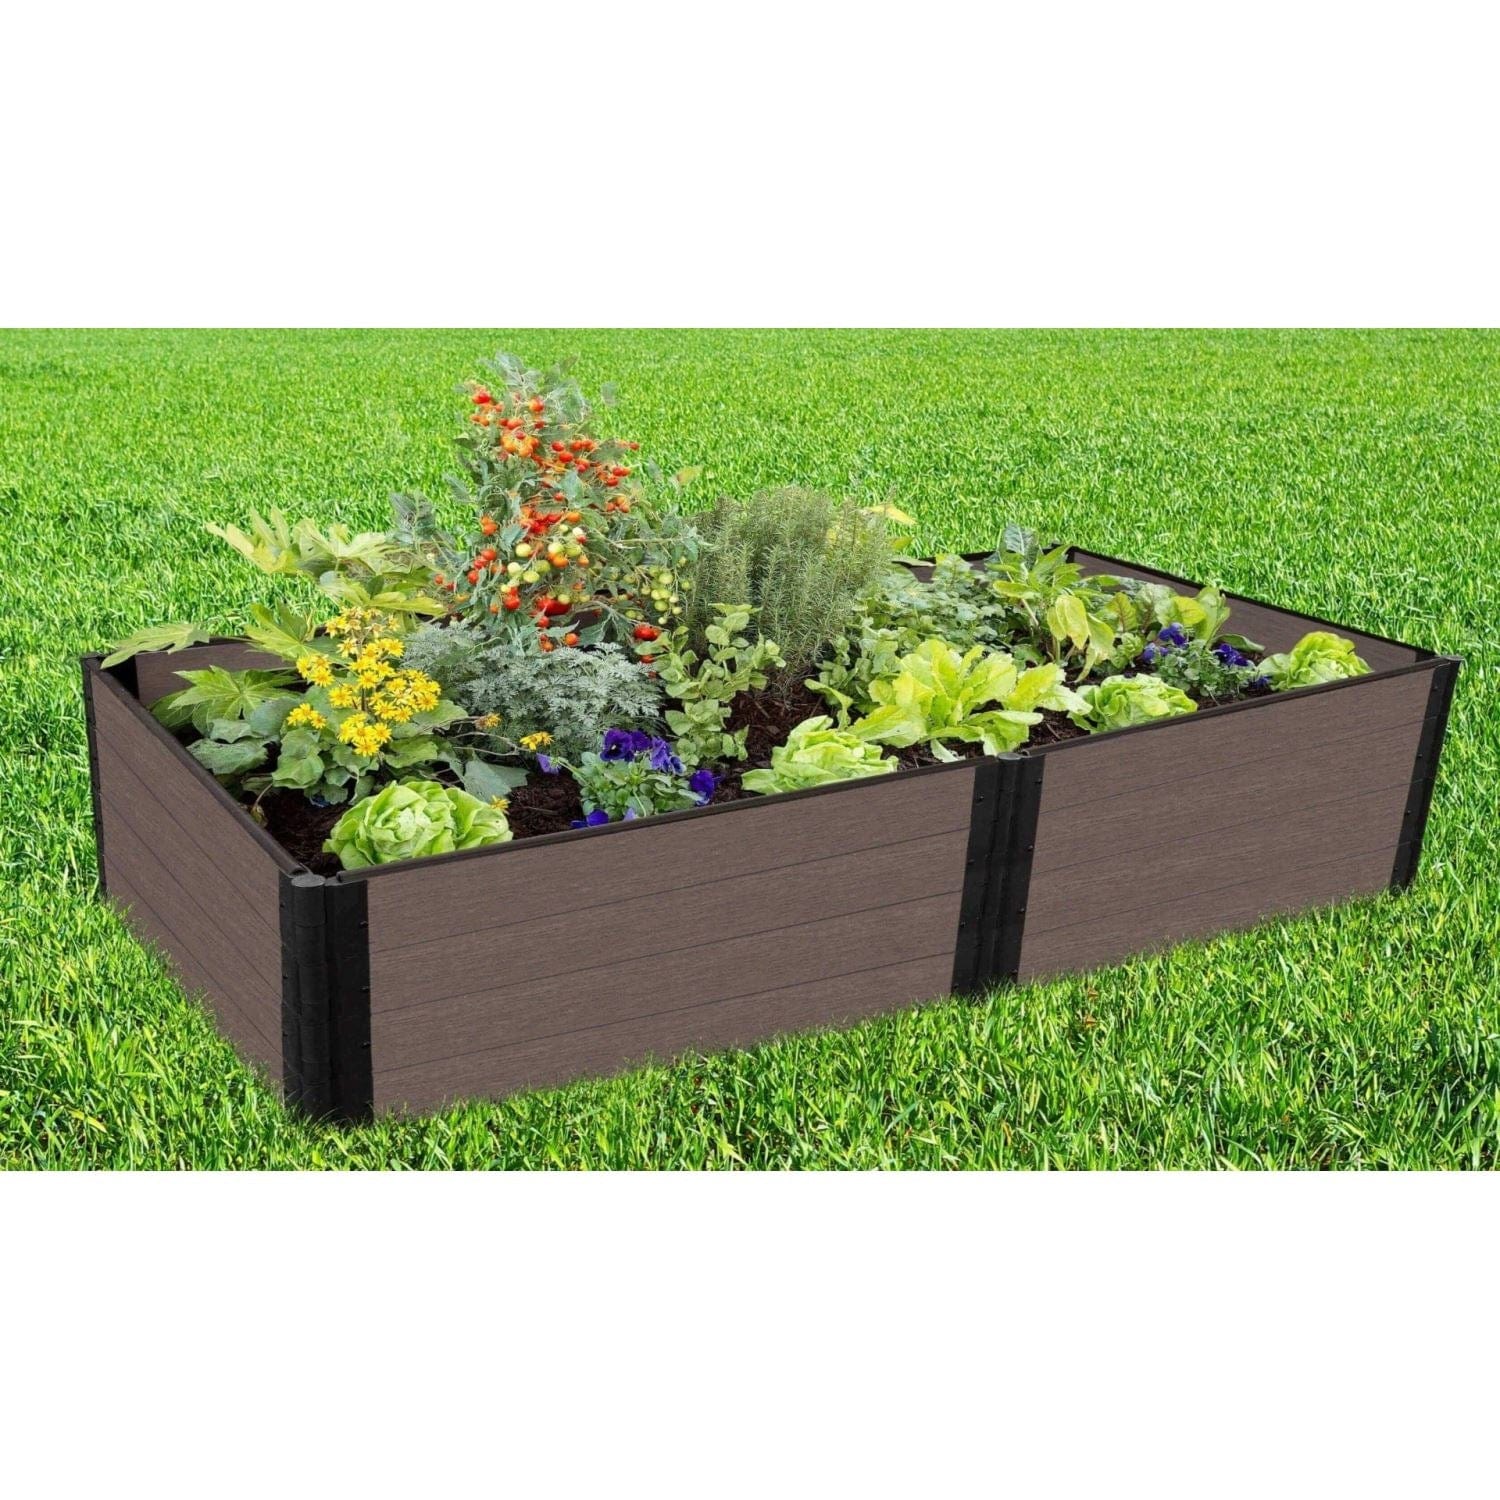 Frame It All Gardening Accessories Frame It All | Weathered Wood Raised Garden Bed 4' X 8' X 22" - 1 " Profile 4 Level 300001443